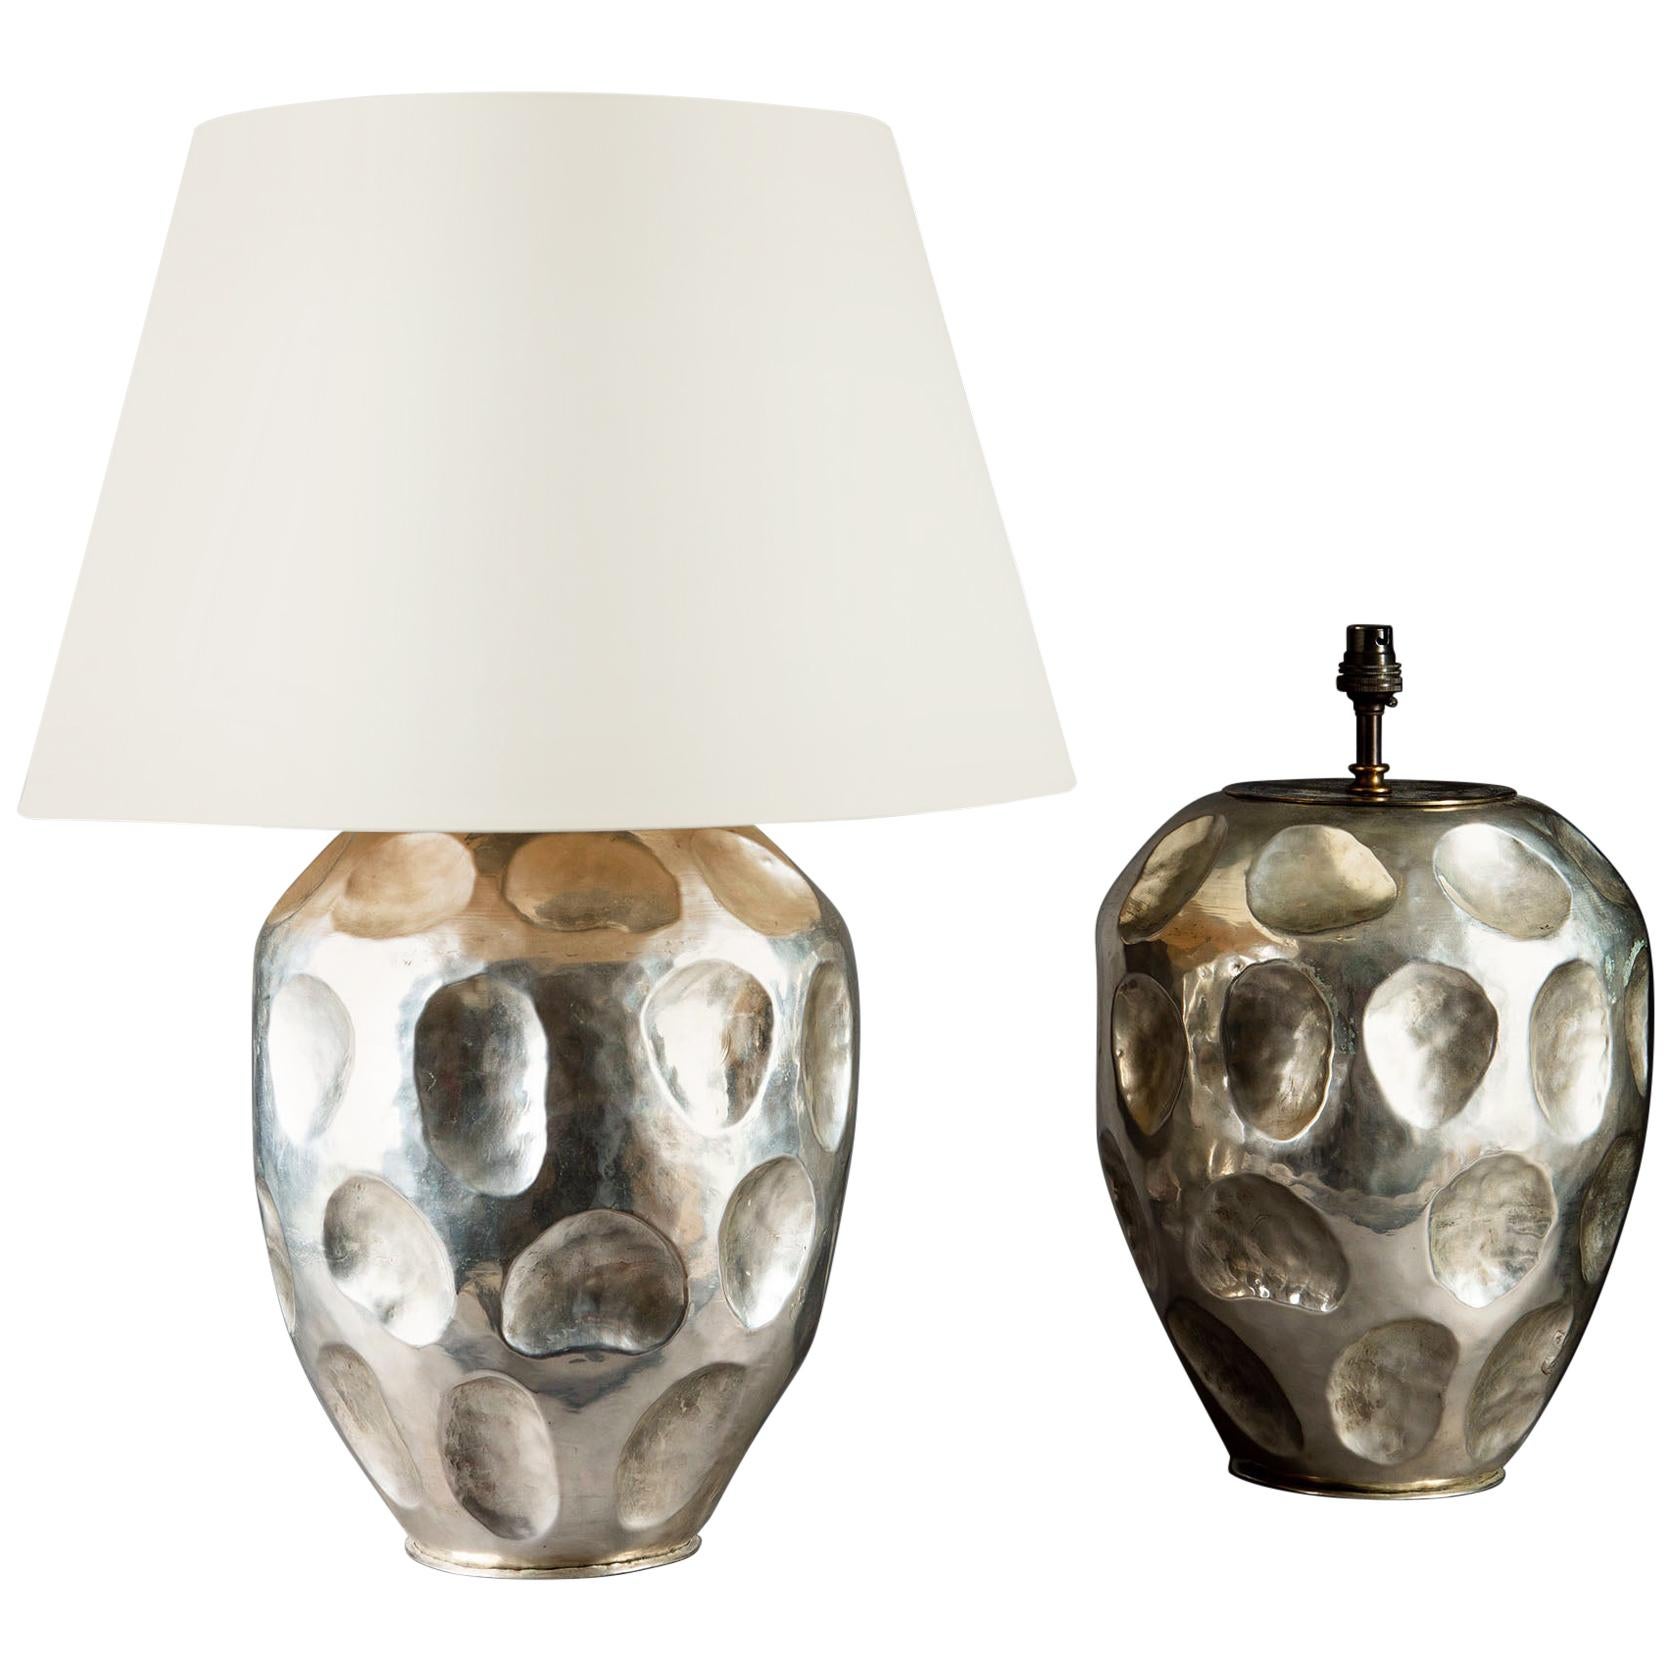 Pair of Large Anamorphic Silvered Metal Table Lamps For Sale